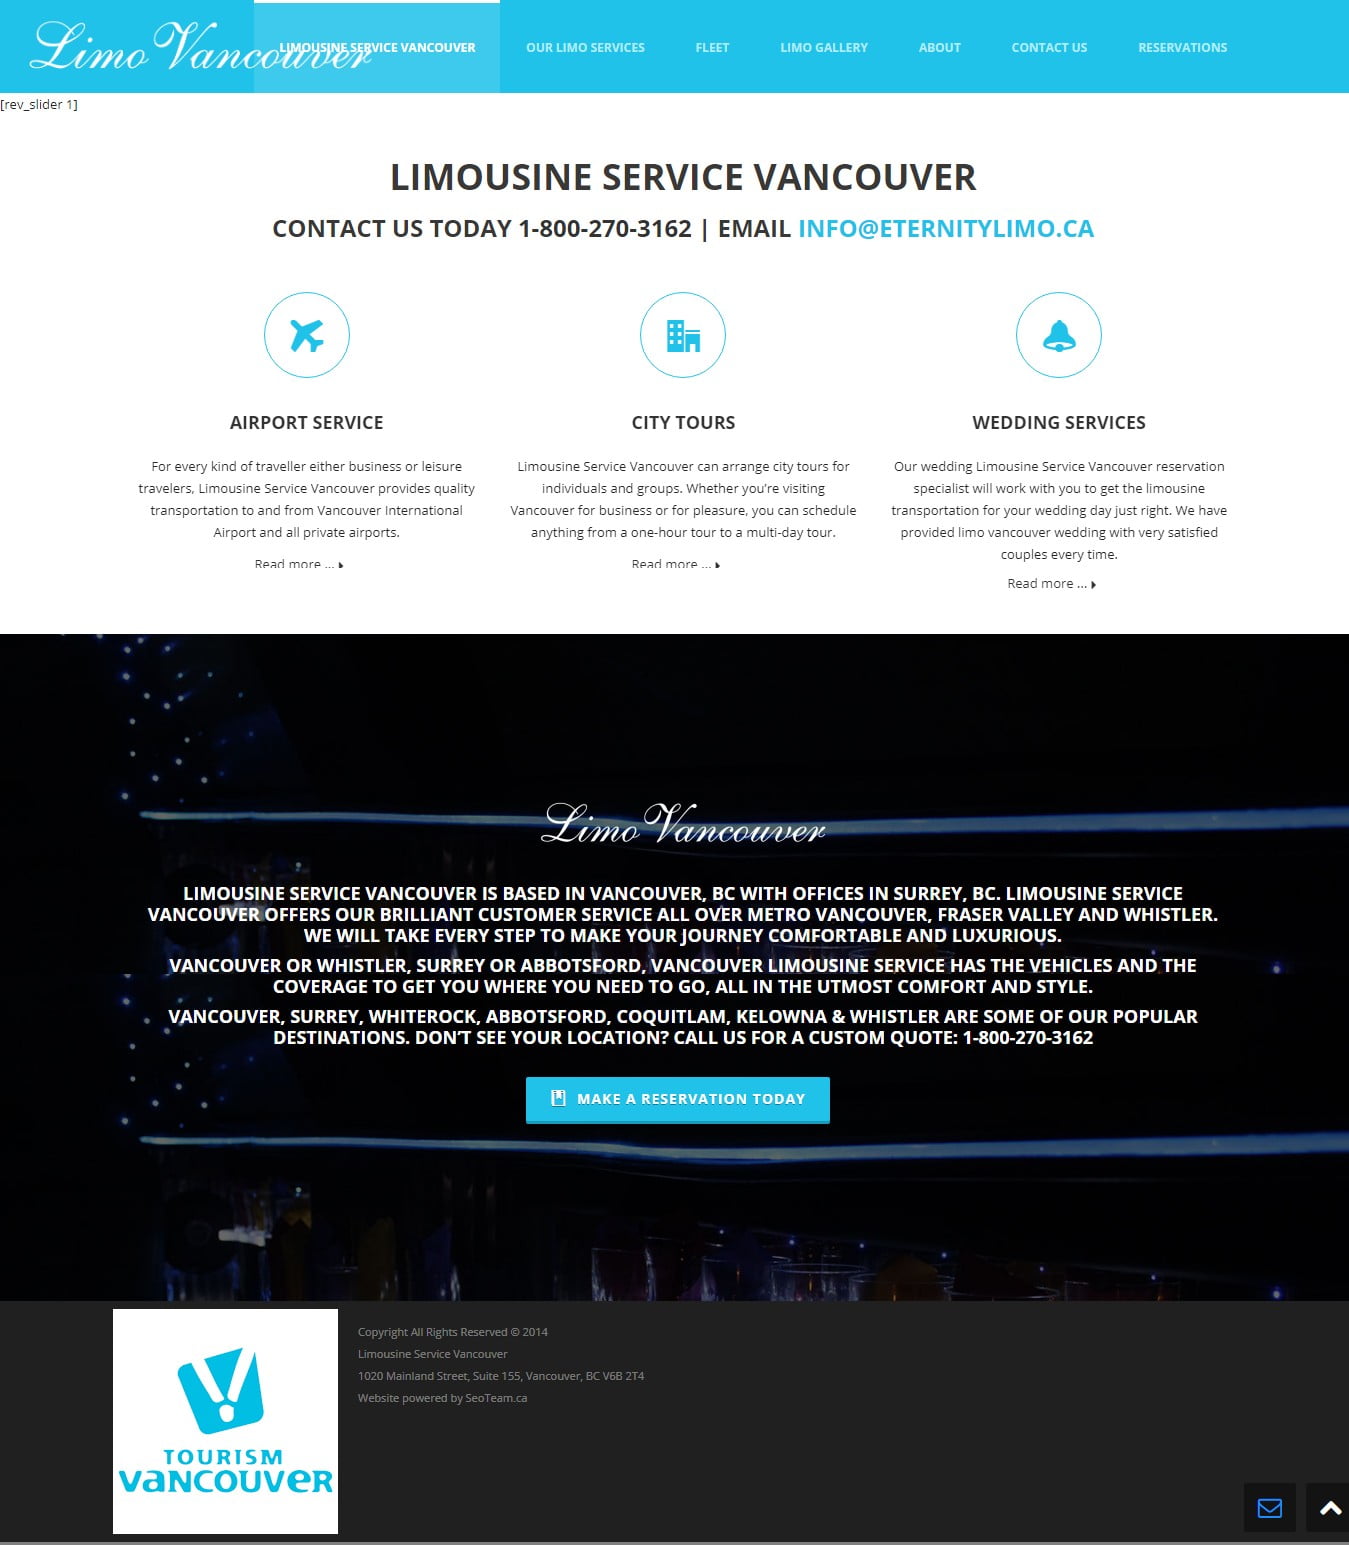 limousineservicevancouver.ca full website